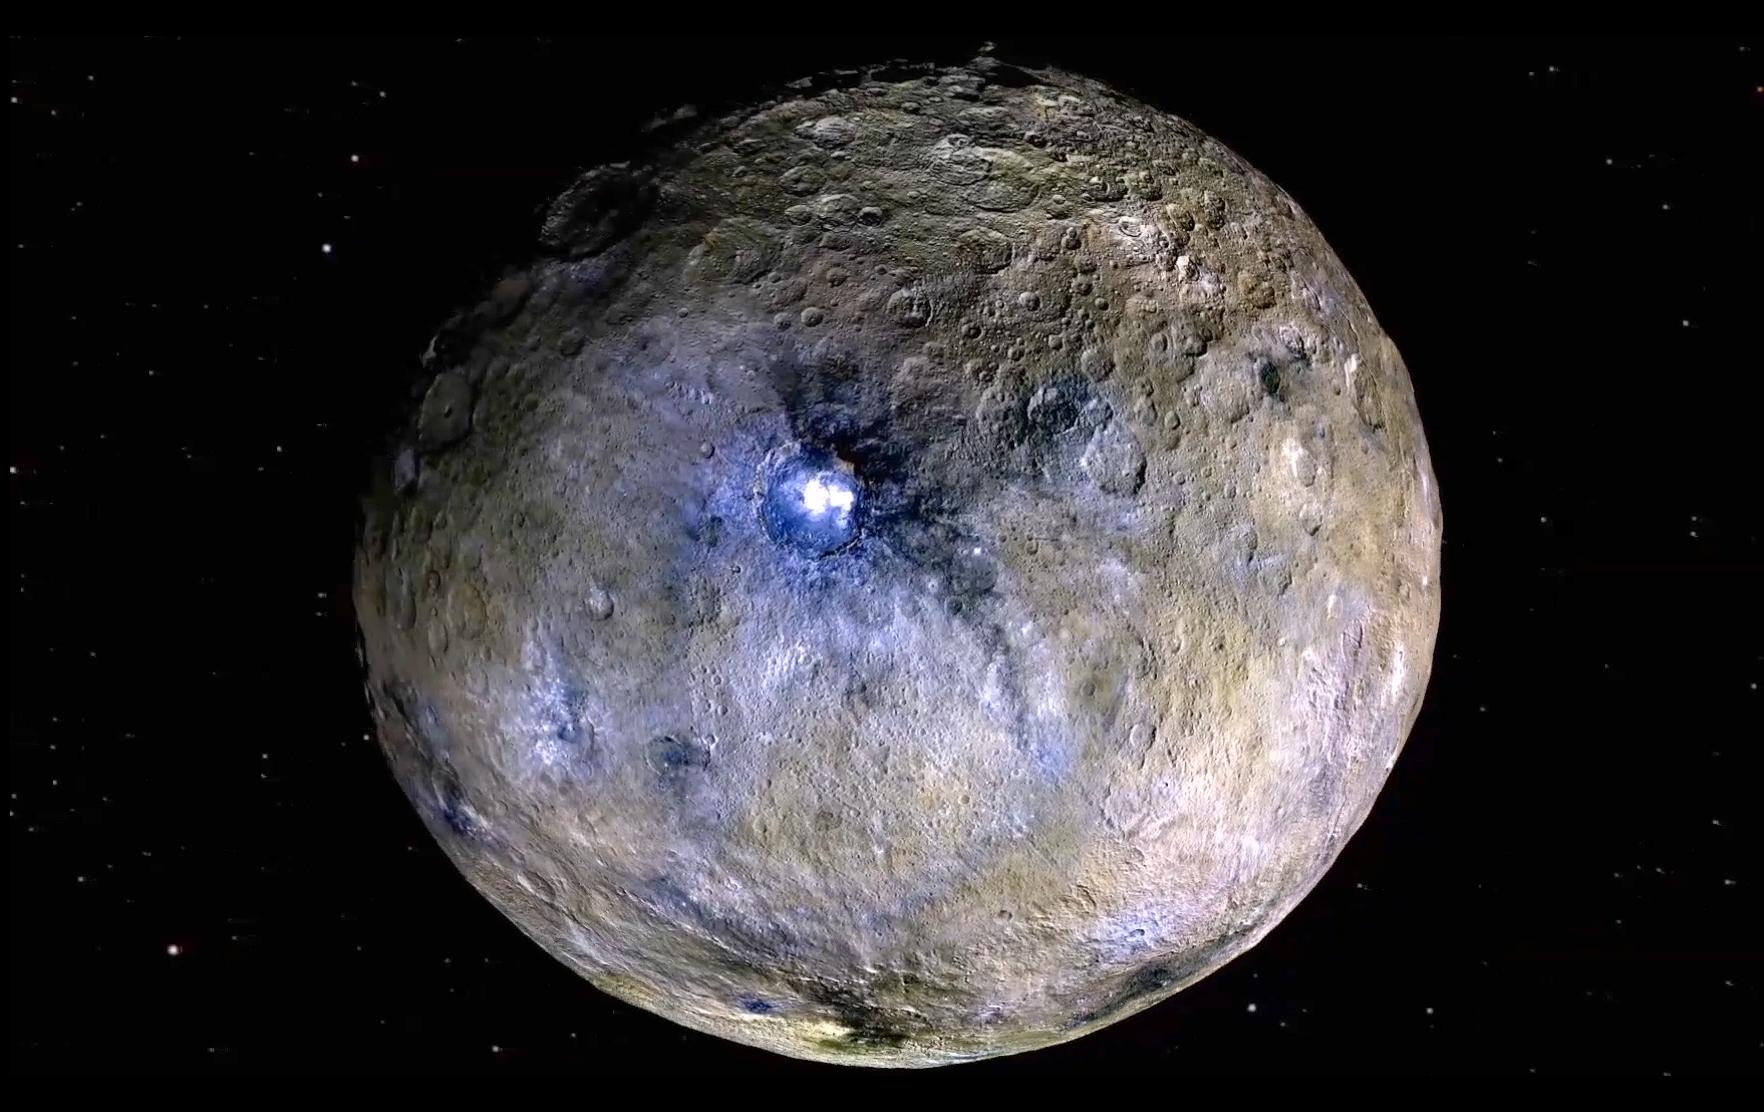 Dwarf planet Ceres shown in false colour, and its bright Occator Crater. (Image: NASA/JPL-CalTech/UCLA/MPS/DLR/IDA)